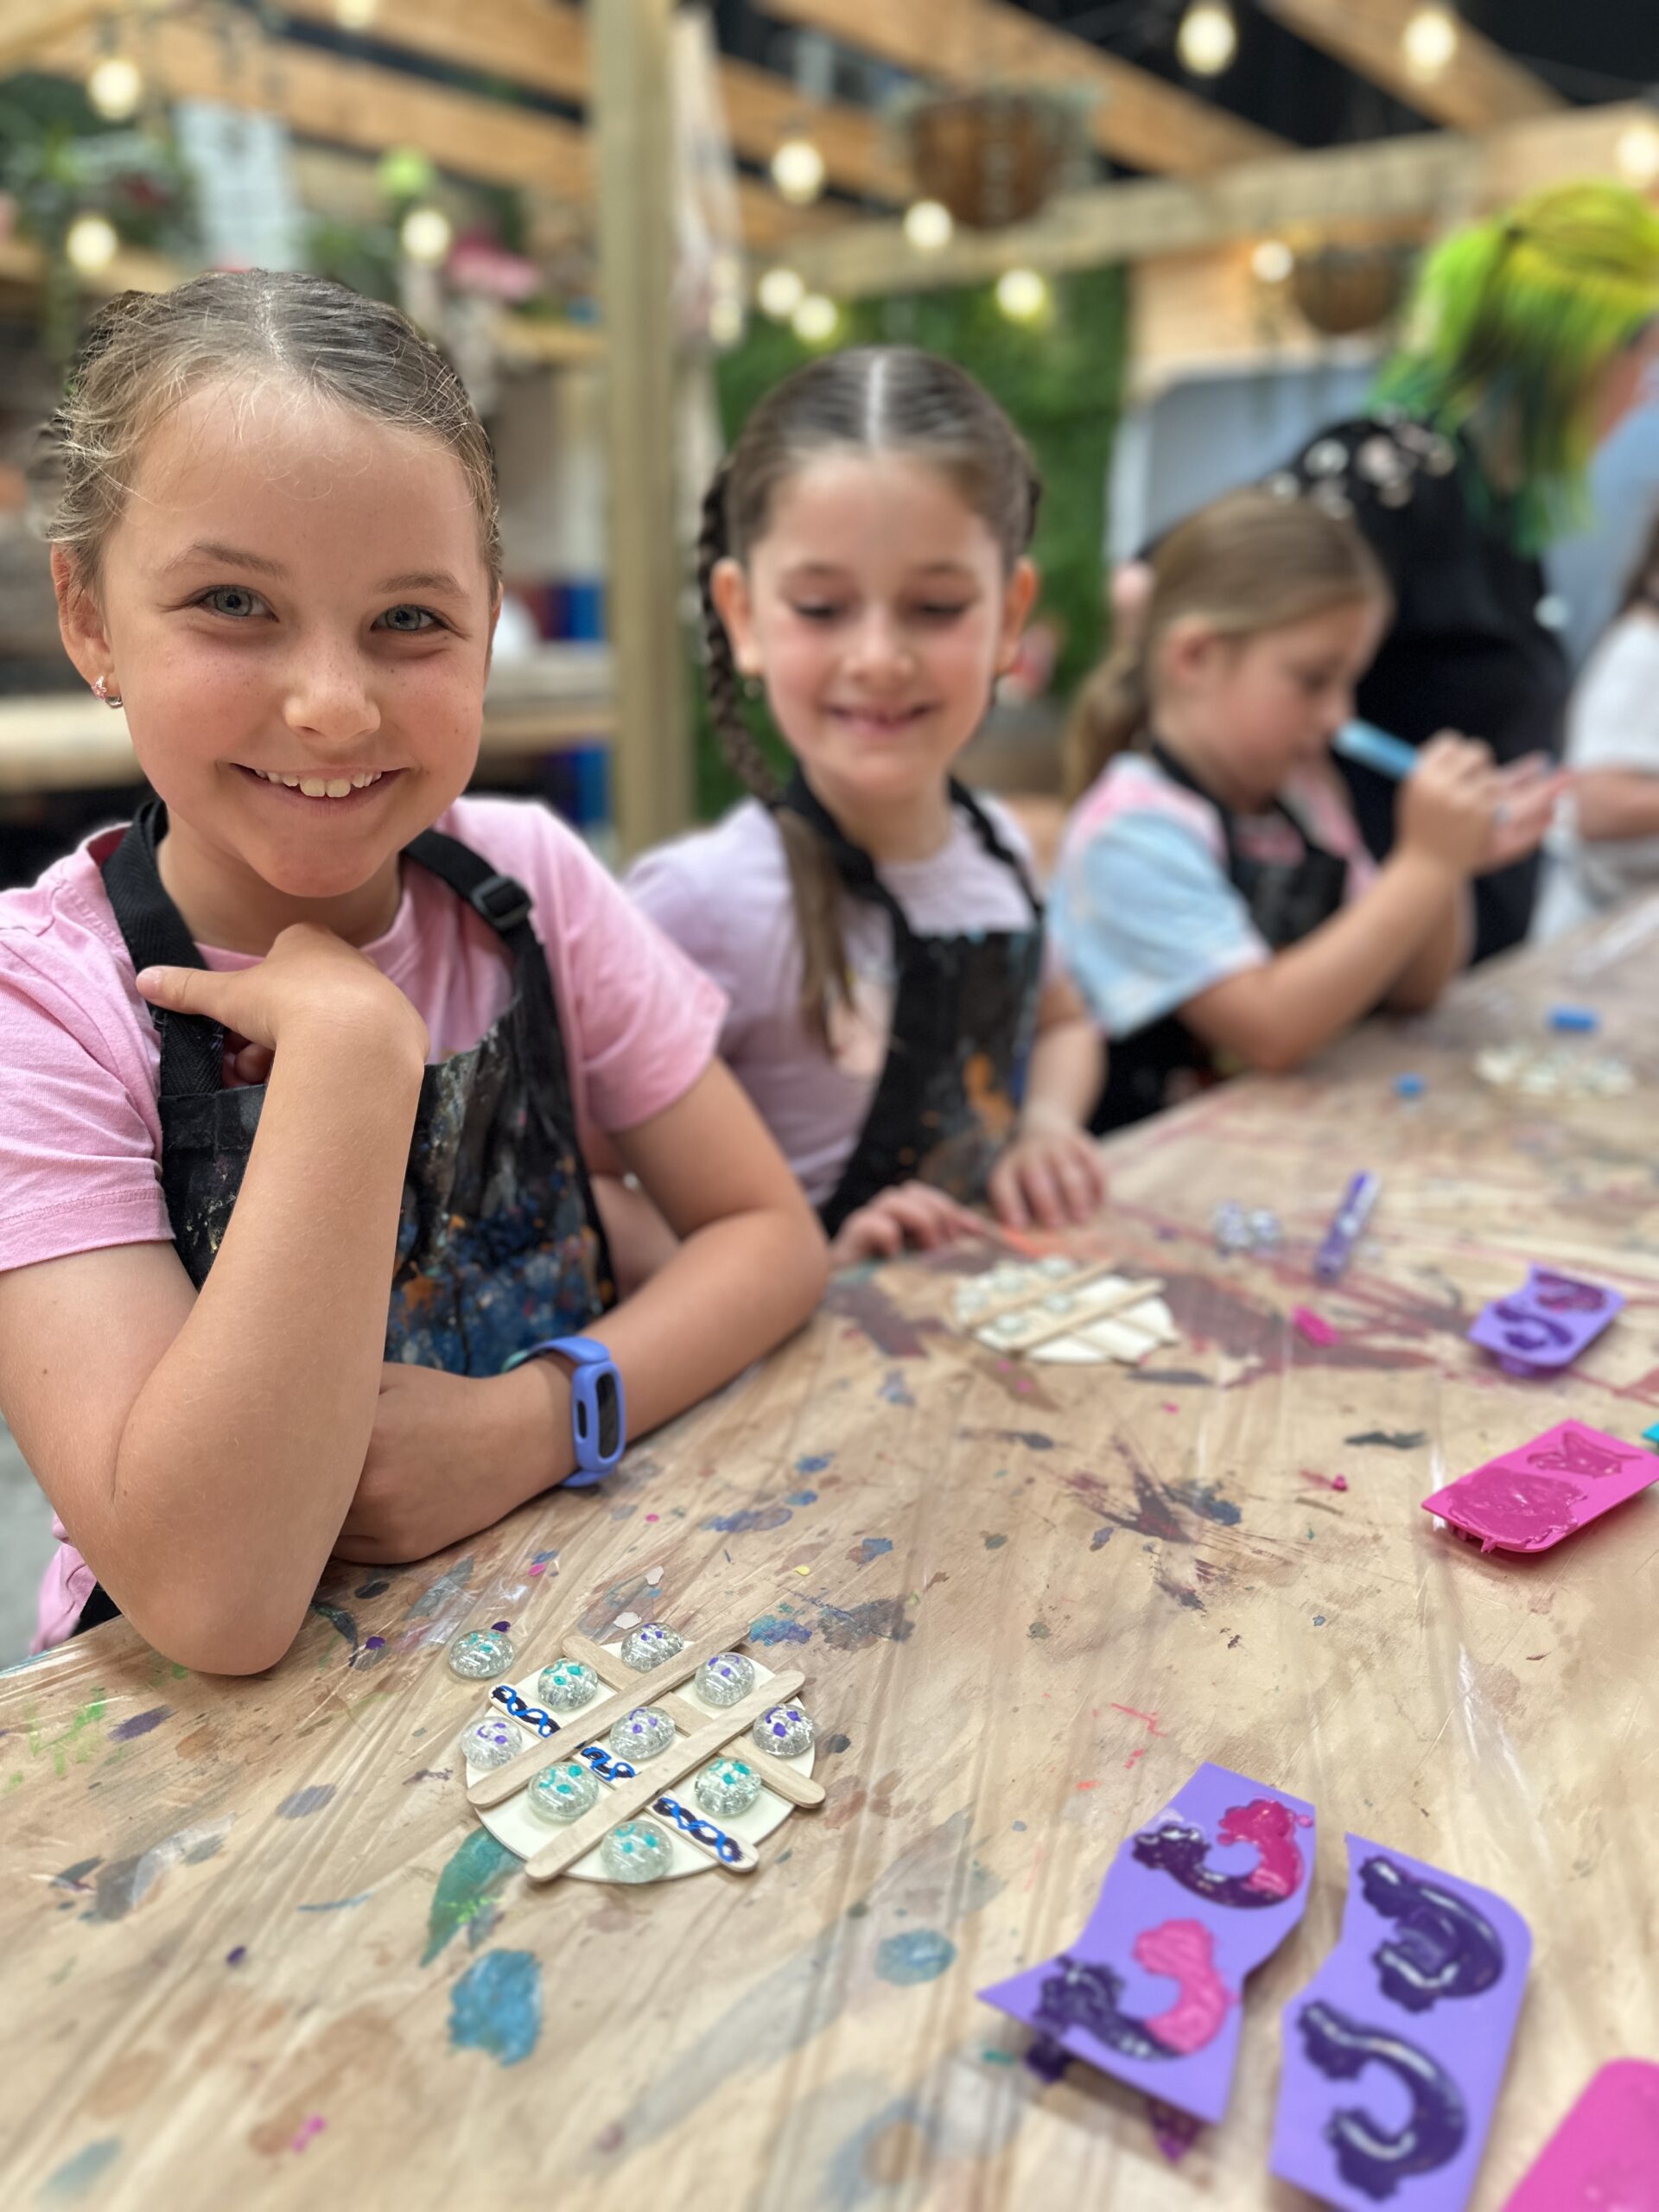 School Holiday 4hr Workshops - Painting and 2 Assorted Craft Activities